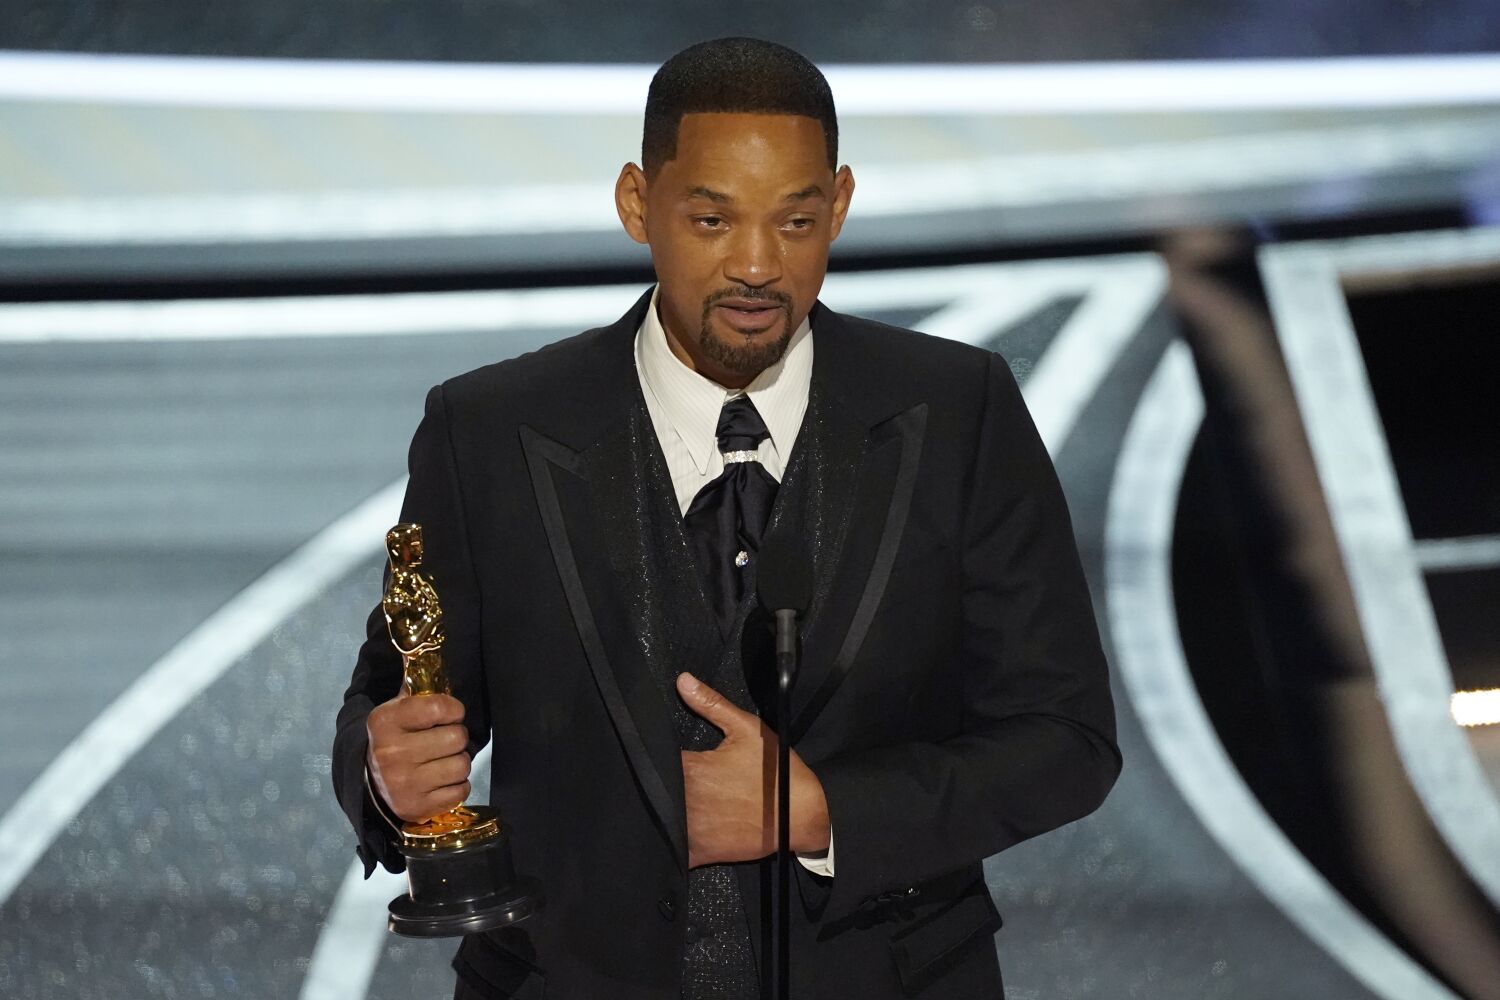 Breaking tradition, Will Smith won't present at the Oscars this year. So... now what?